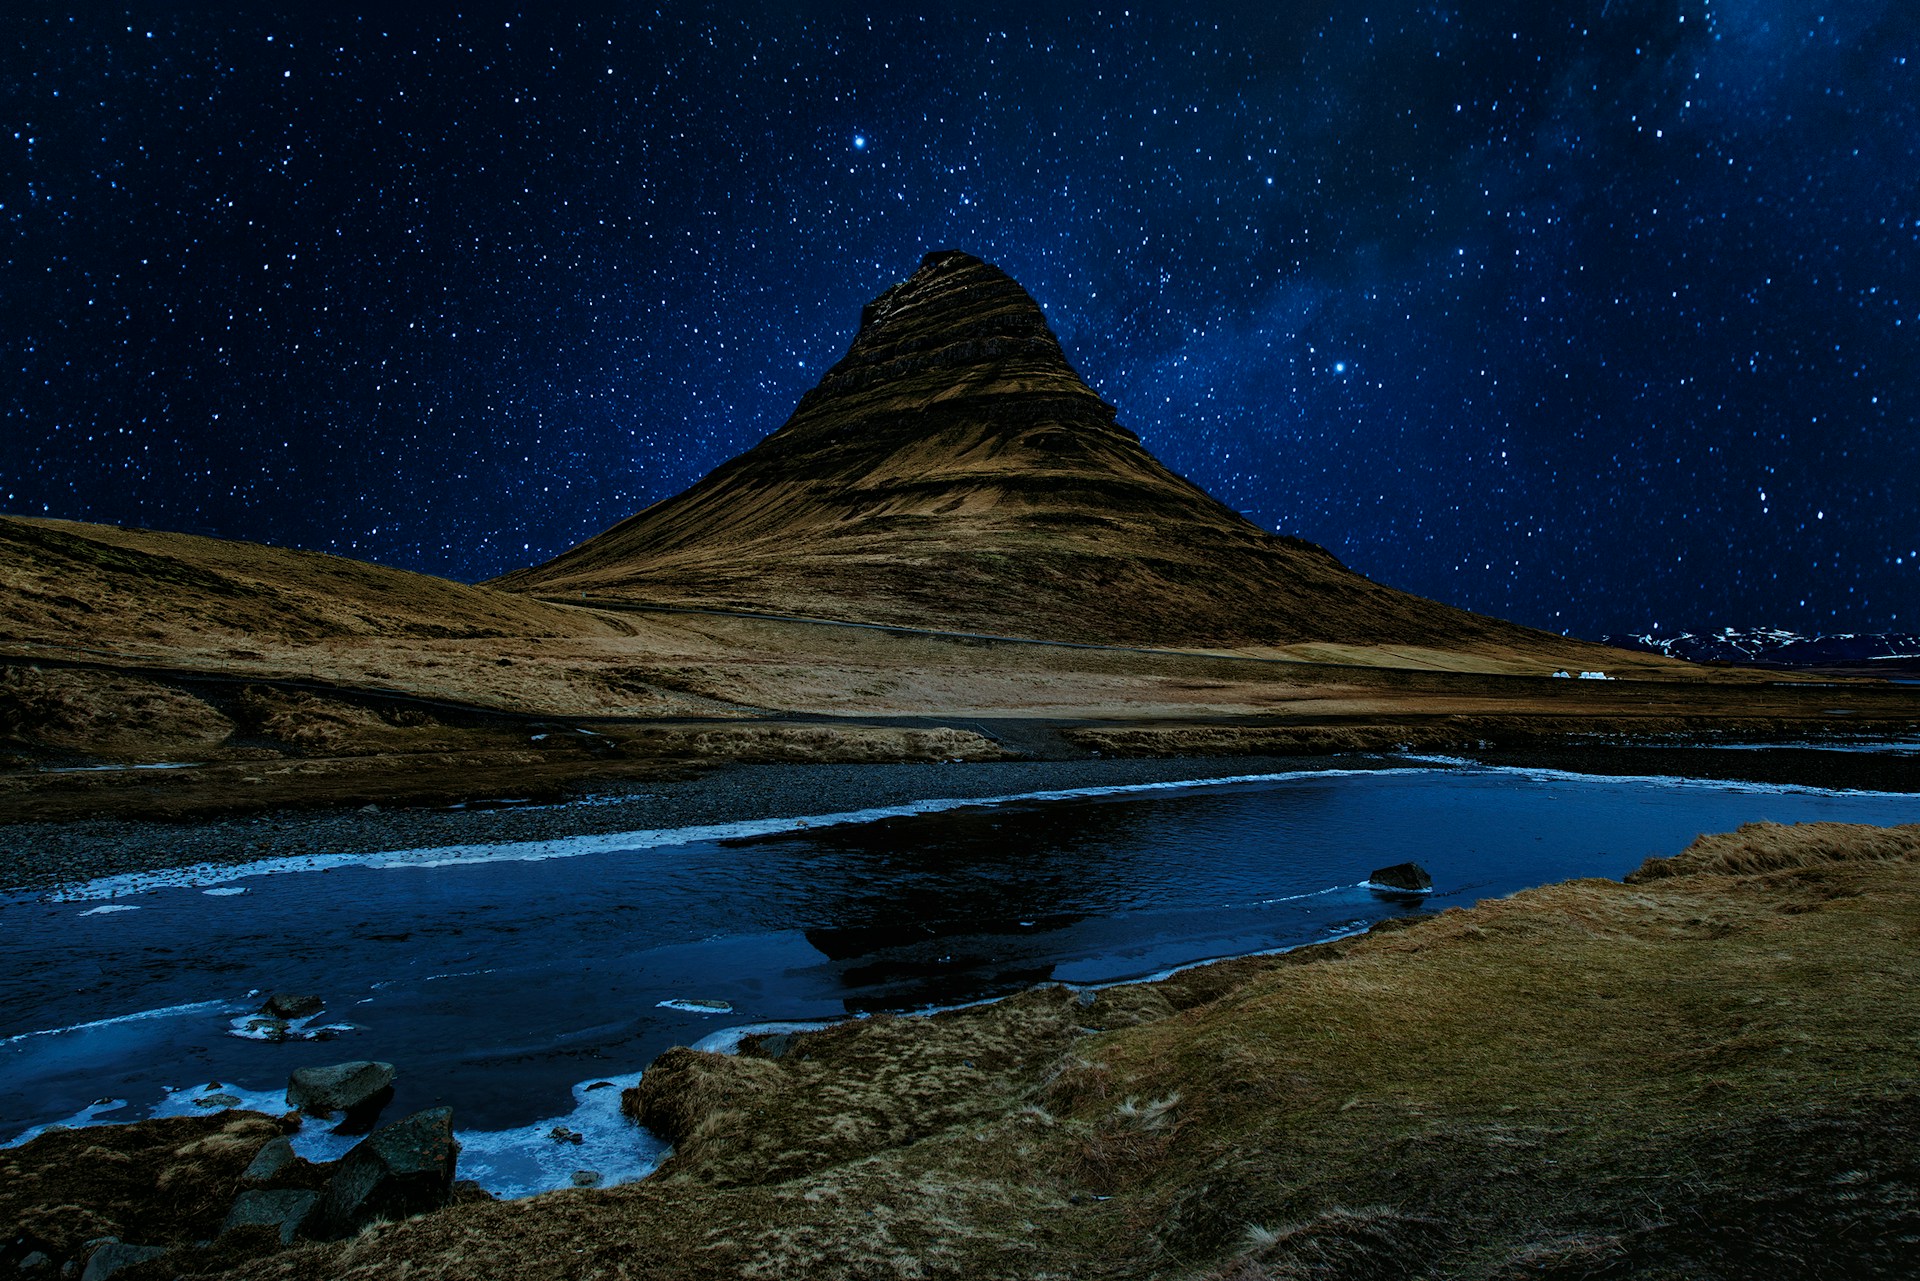 Milky Way Galaxy photographed over Kirkjufell mountain in Iceland - a best place to see the Milky Way